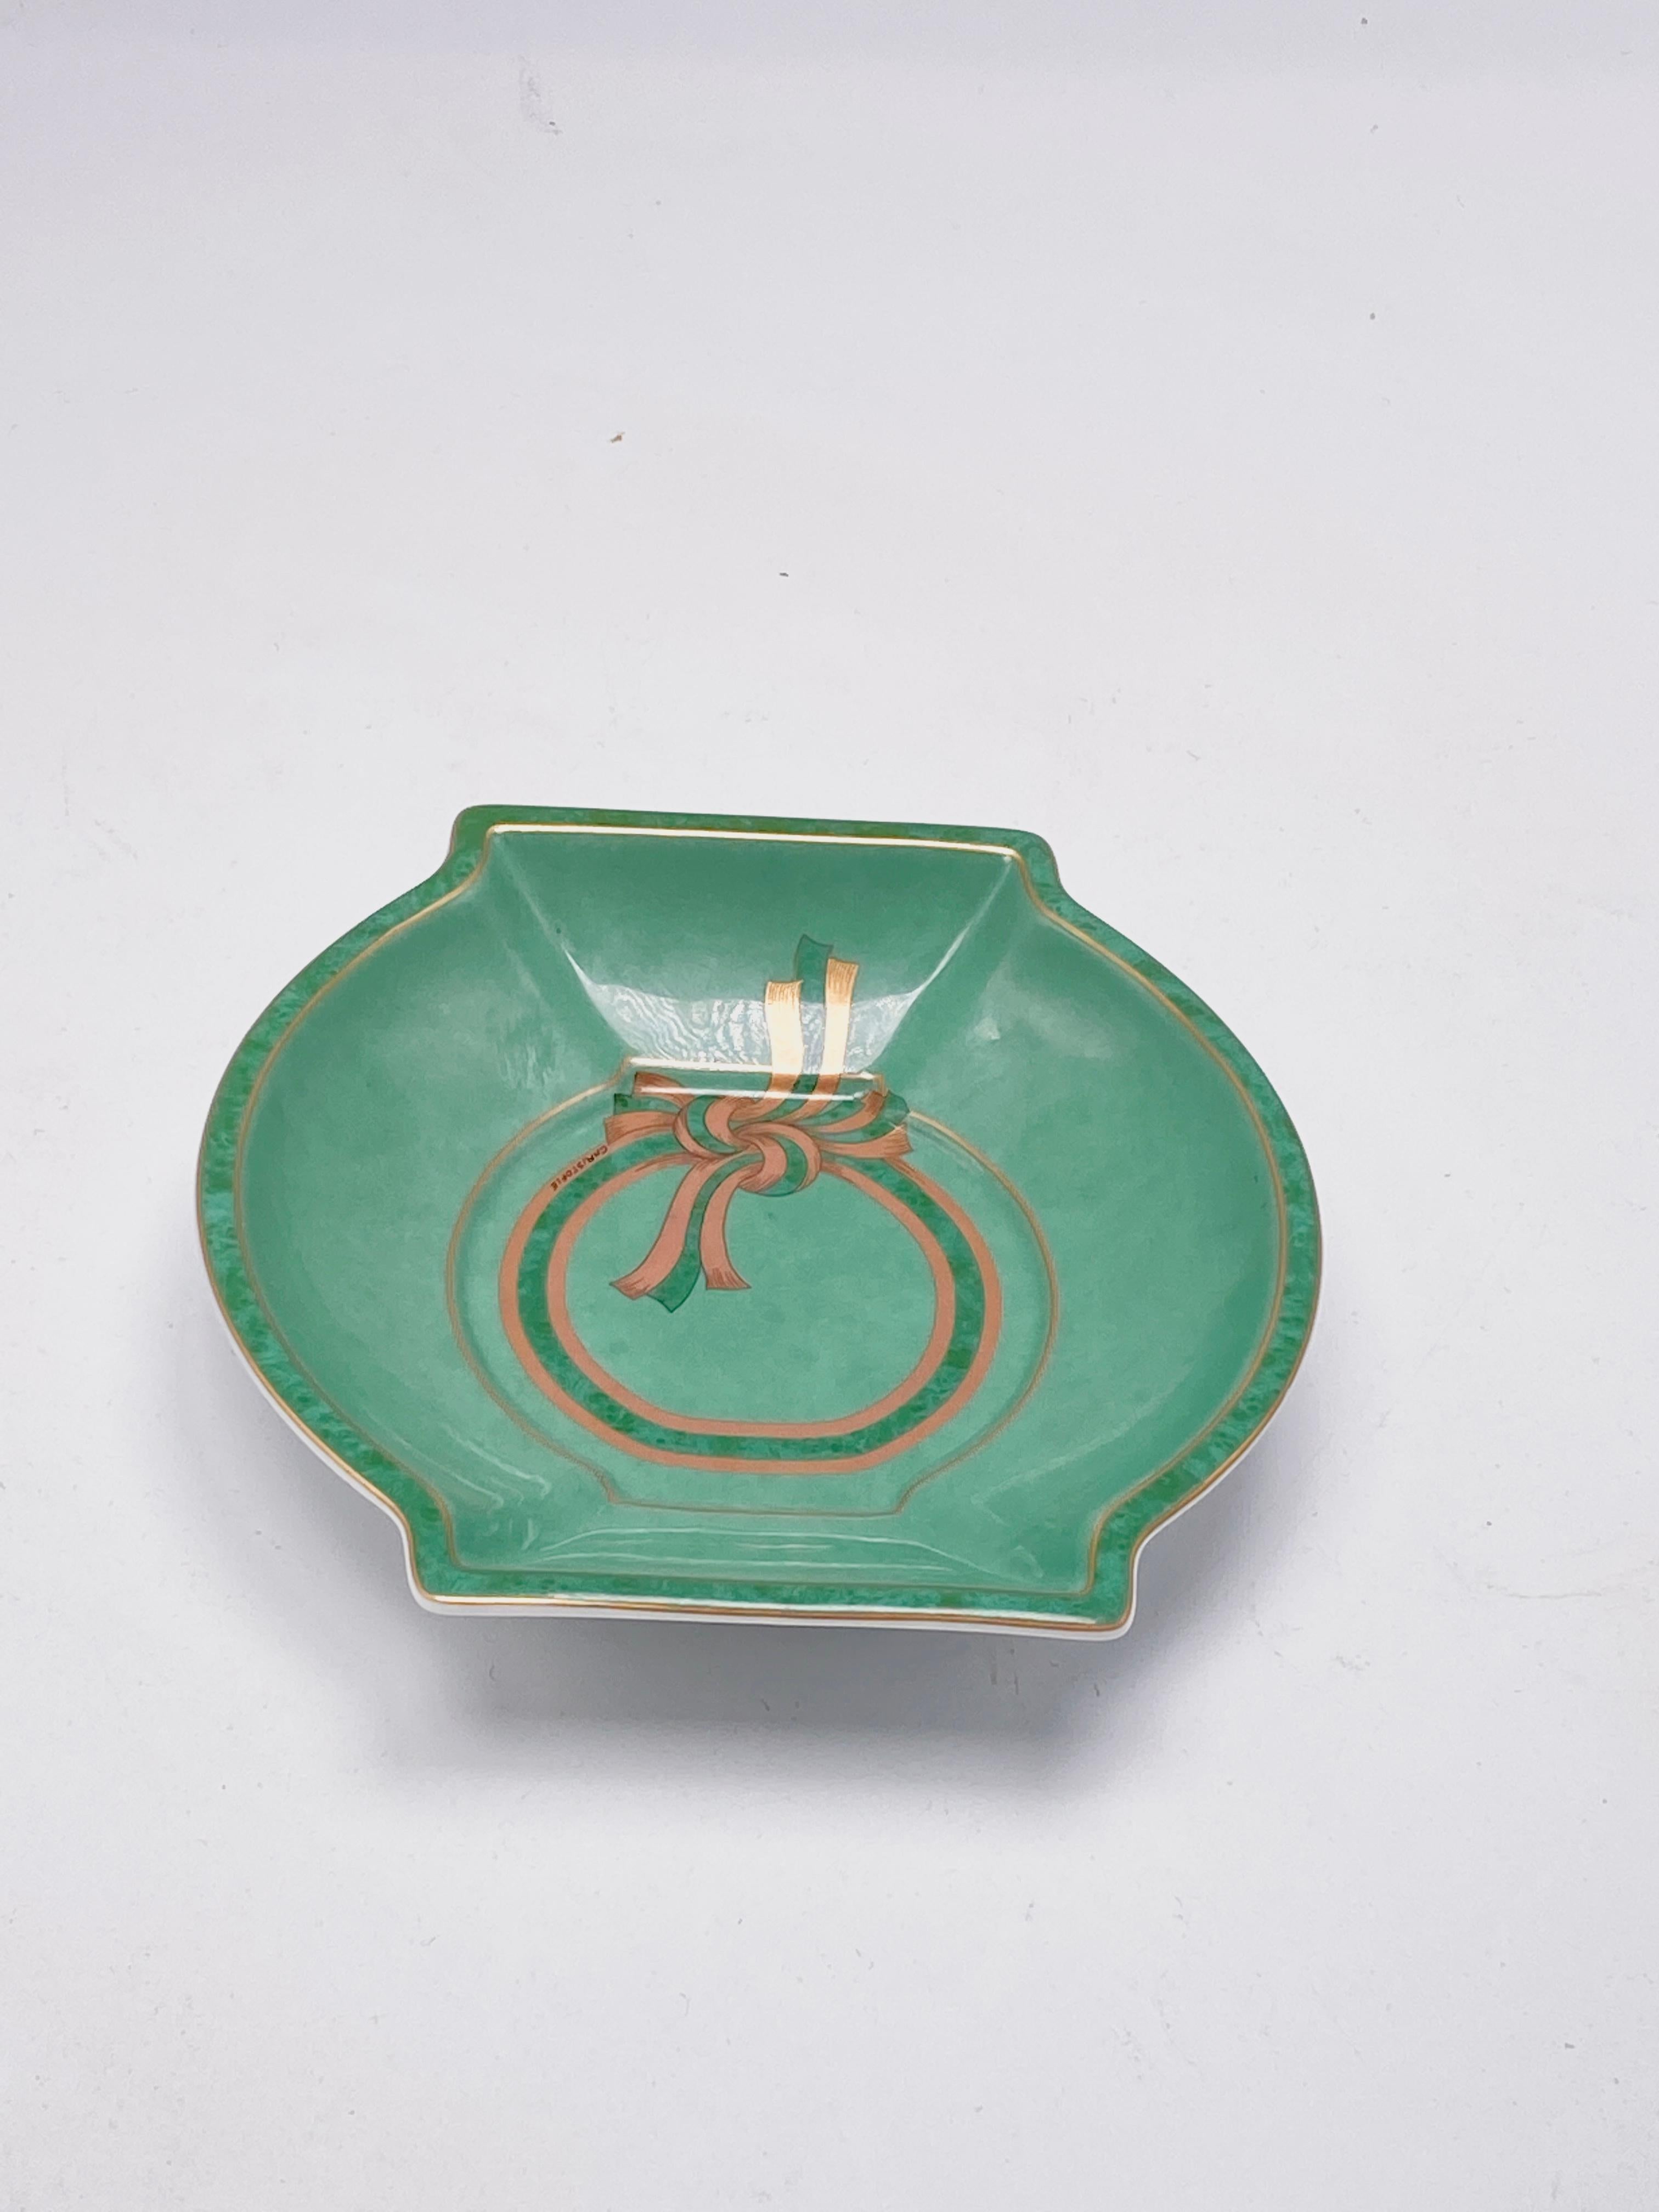 Rare porcelain ashtray signed christofle Paris. With a text written on the back, and an unalterable decoration. This ashtray is in the Neo classic style, green in color with gold tips. It was made in France in the 70s, and is signed. We send quite a